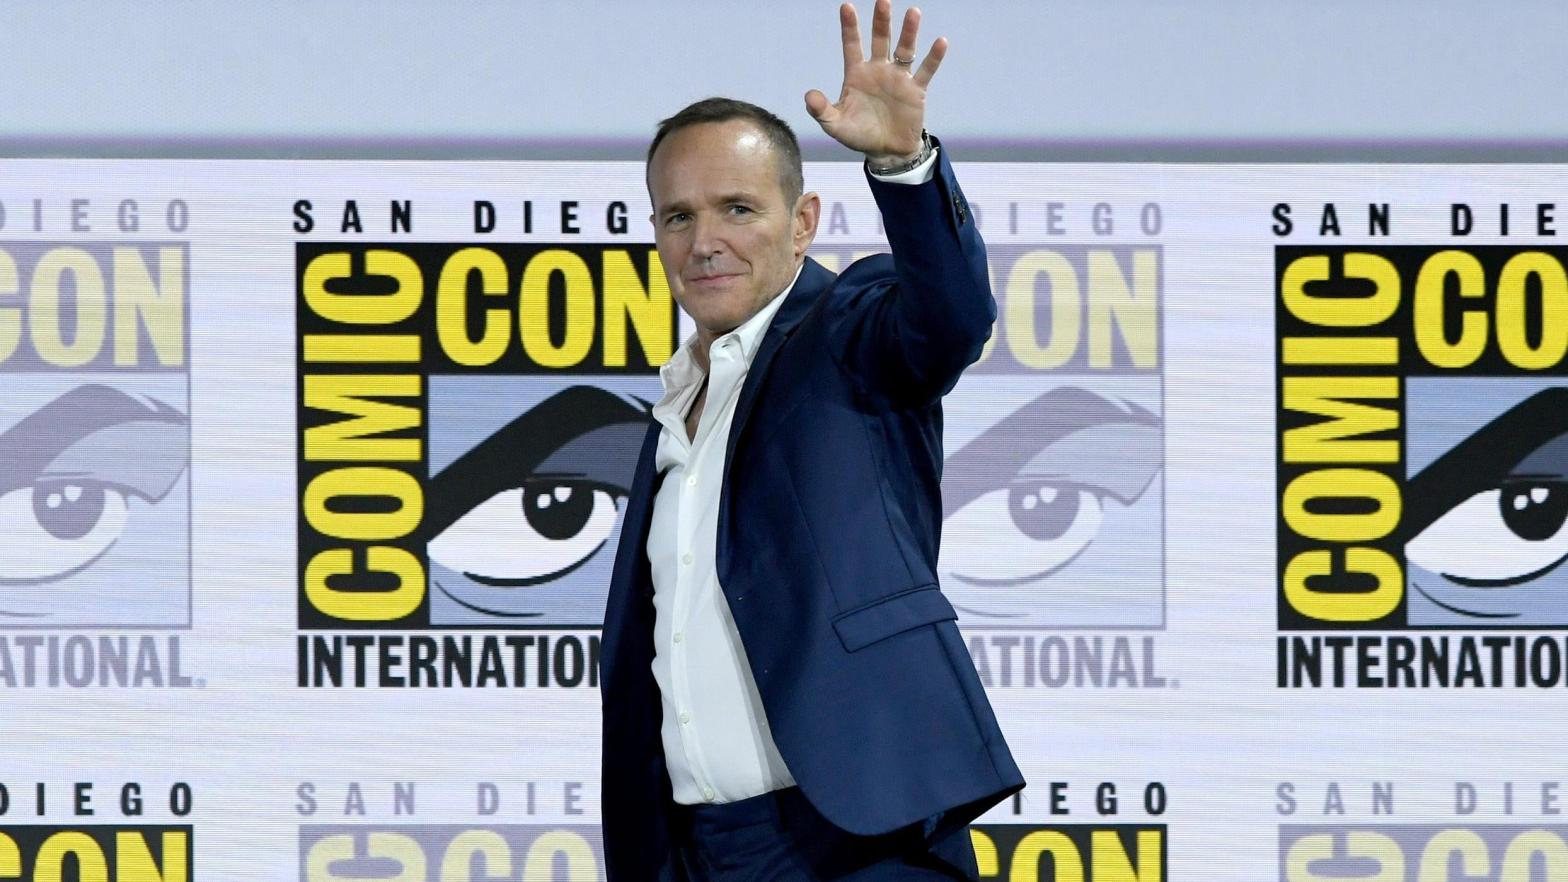 Clark Gregg at the Marvel's Agents of SHIELD panel during the 2019 San Diego Comic-Con. (Photo: Kevin Winter, Getty Images)